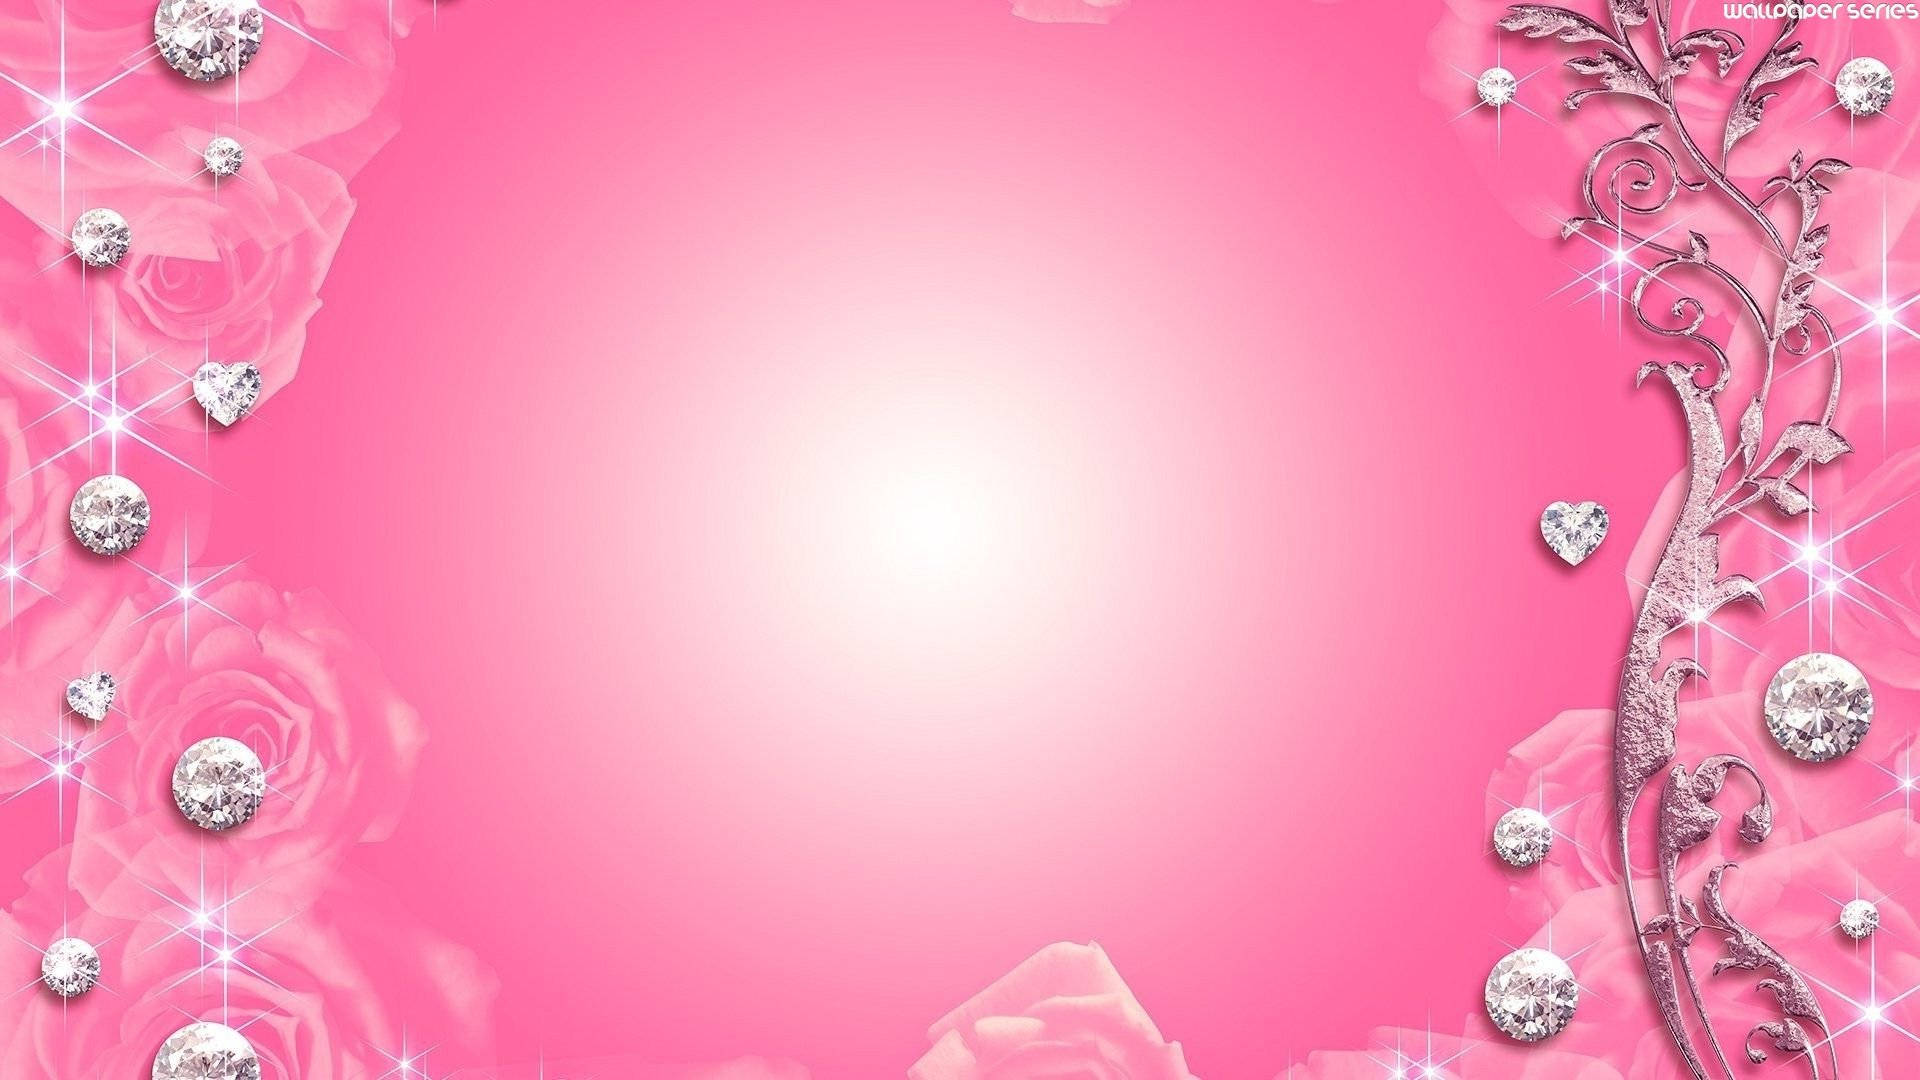 Light Pink Wallpapers 64 pictures